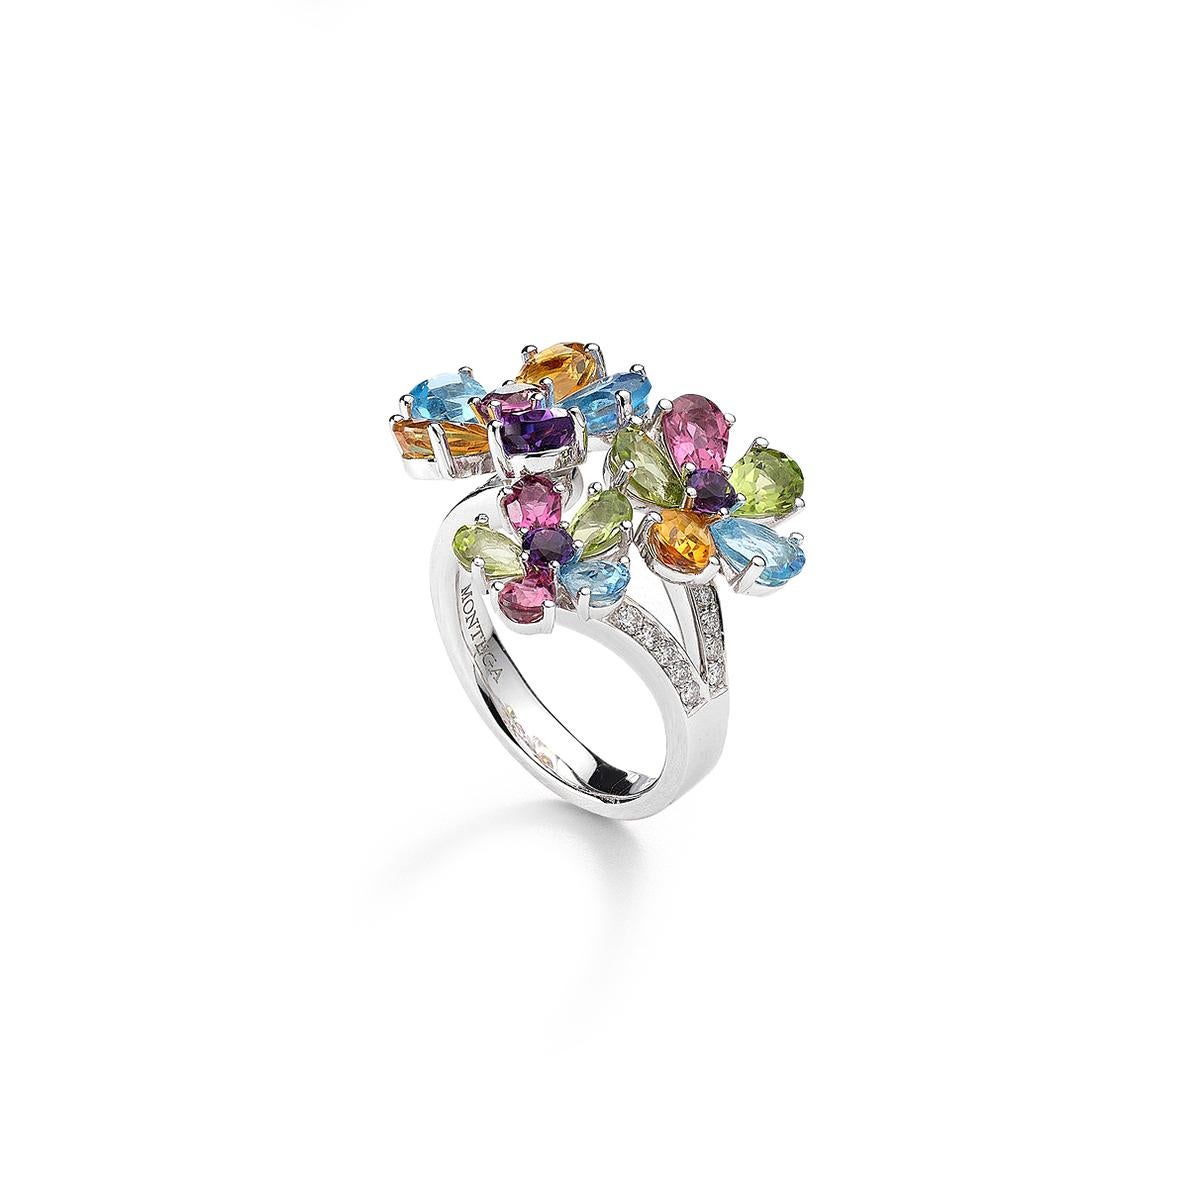 Ring in 18kt white gold set with 14 diamonds 0.19 cts, 4 blue topazes 2.48 cts 3 citrines 1.61 cts, 4 peridots 1.36 cts, 4 toumalines 1.05 cts Size 55 and 3 amethysts 0.87 cts Size 54                   